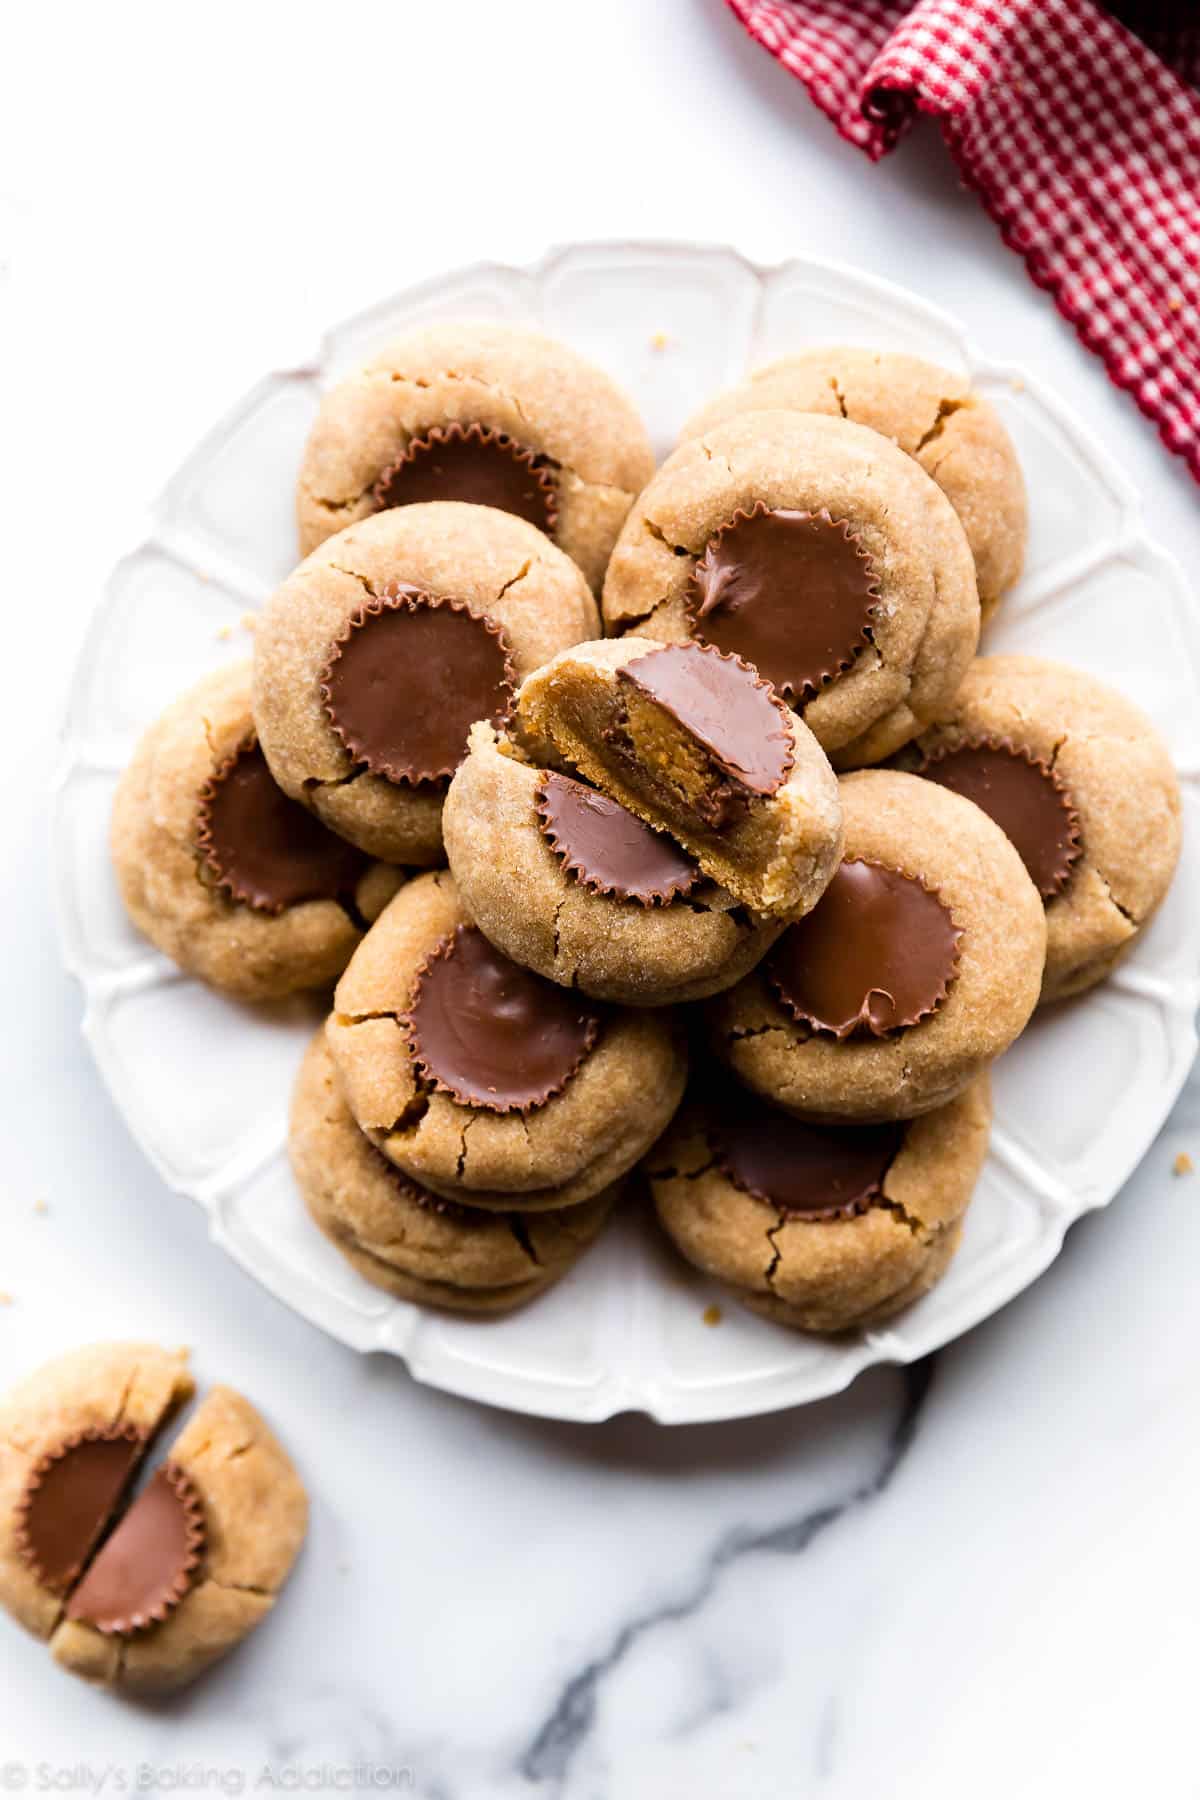 Reeses peanut butter cookies on a white plate